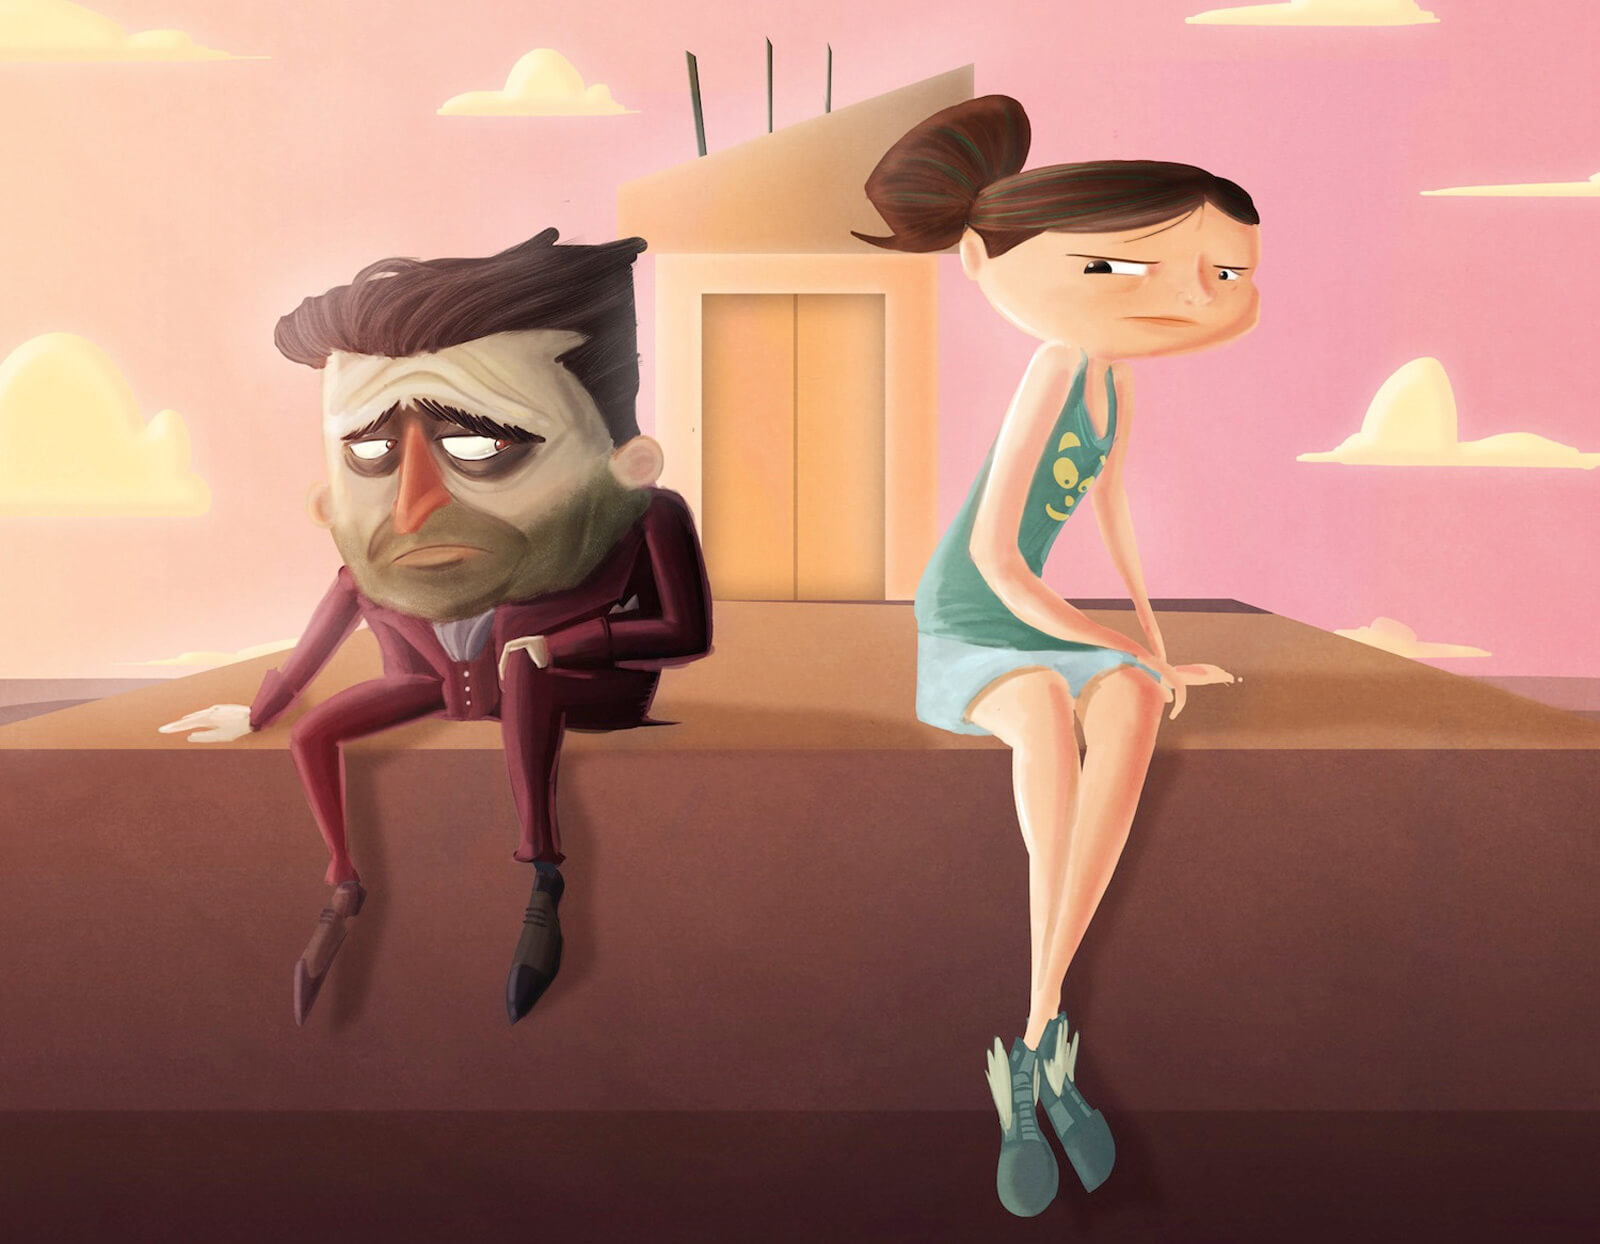 Concept art for the film Super Secret, a large-headed man in a maroon suit sits next to a taller girl in a teal tank top